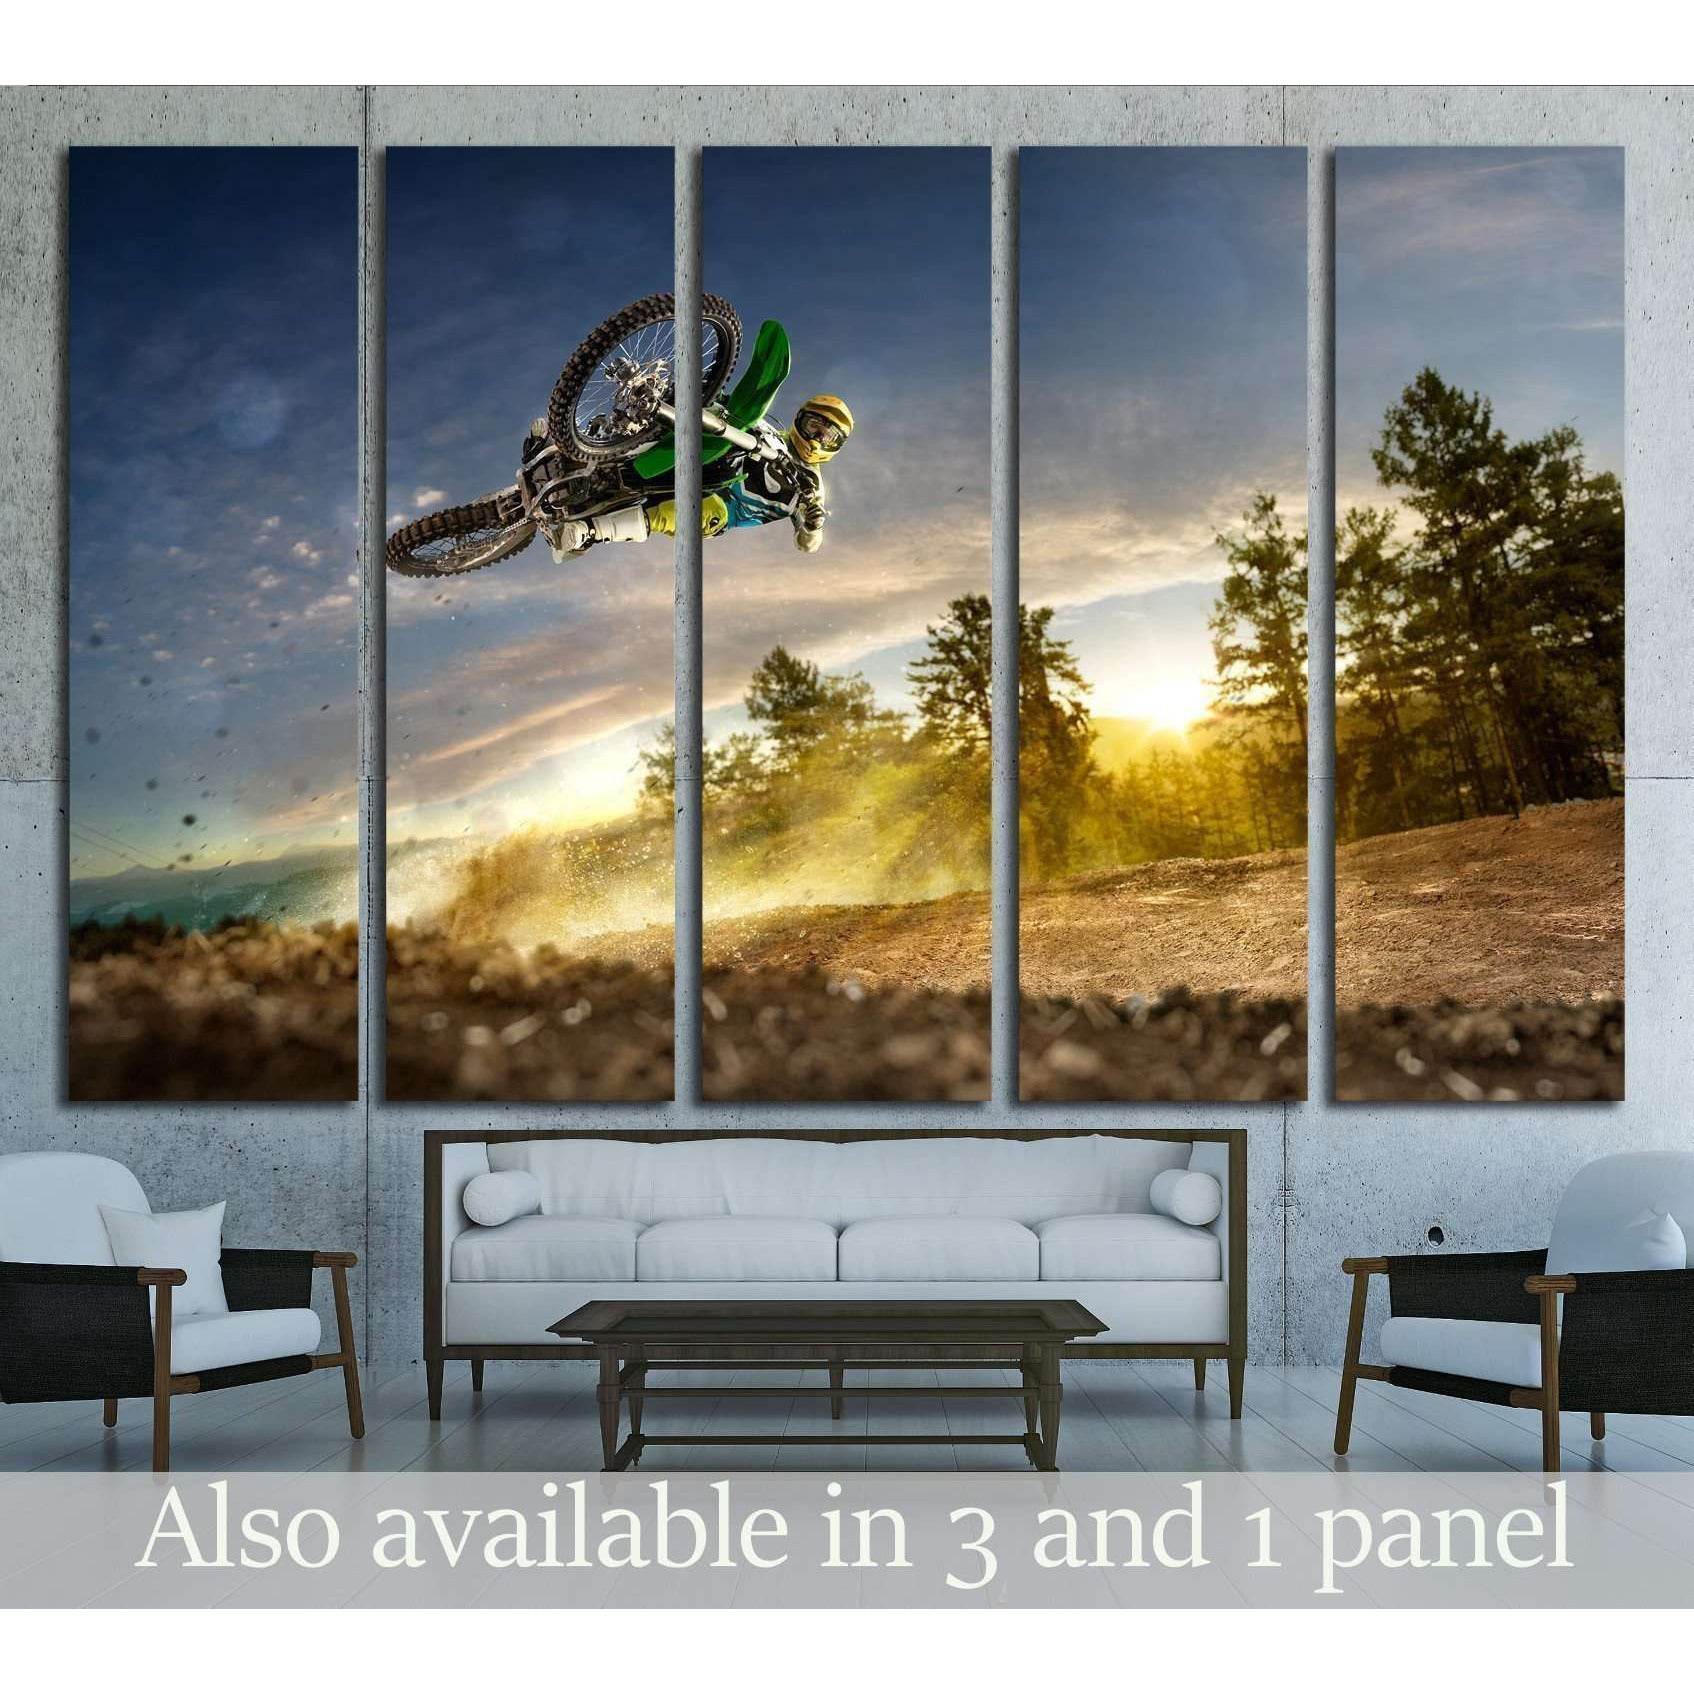 Dirt bike rider is flying high in evening №1870 Ready to Hang Canvas Print